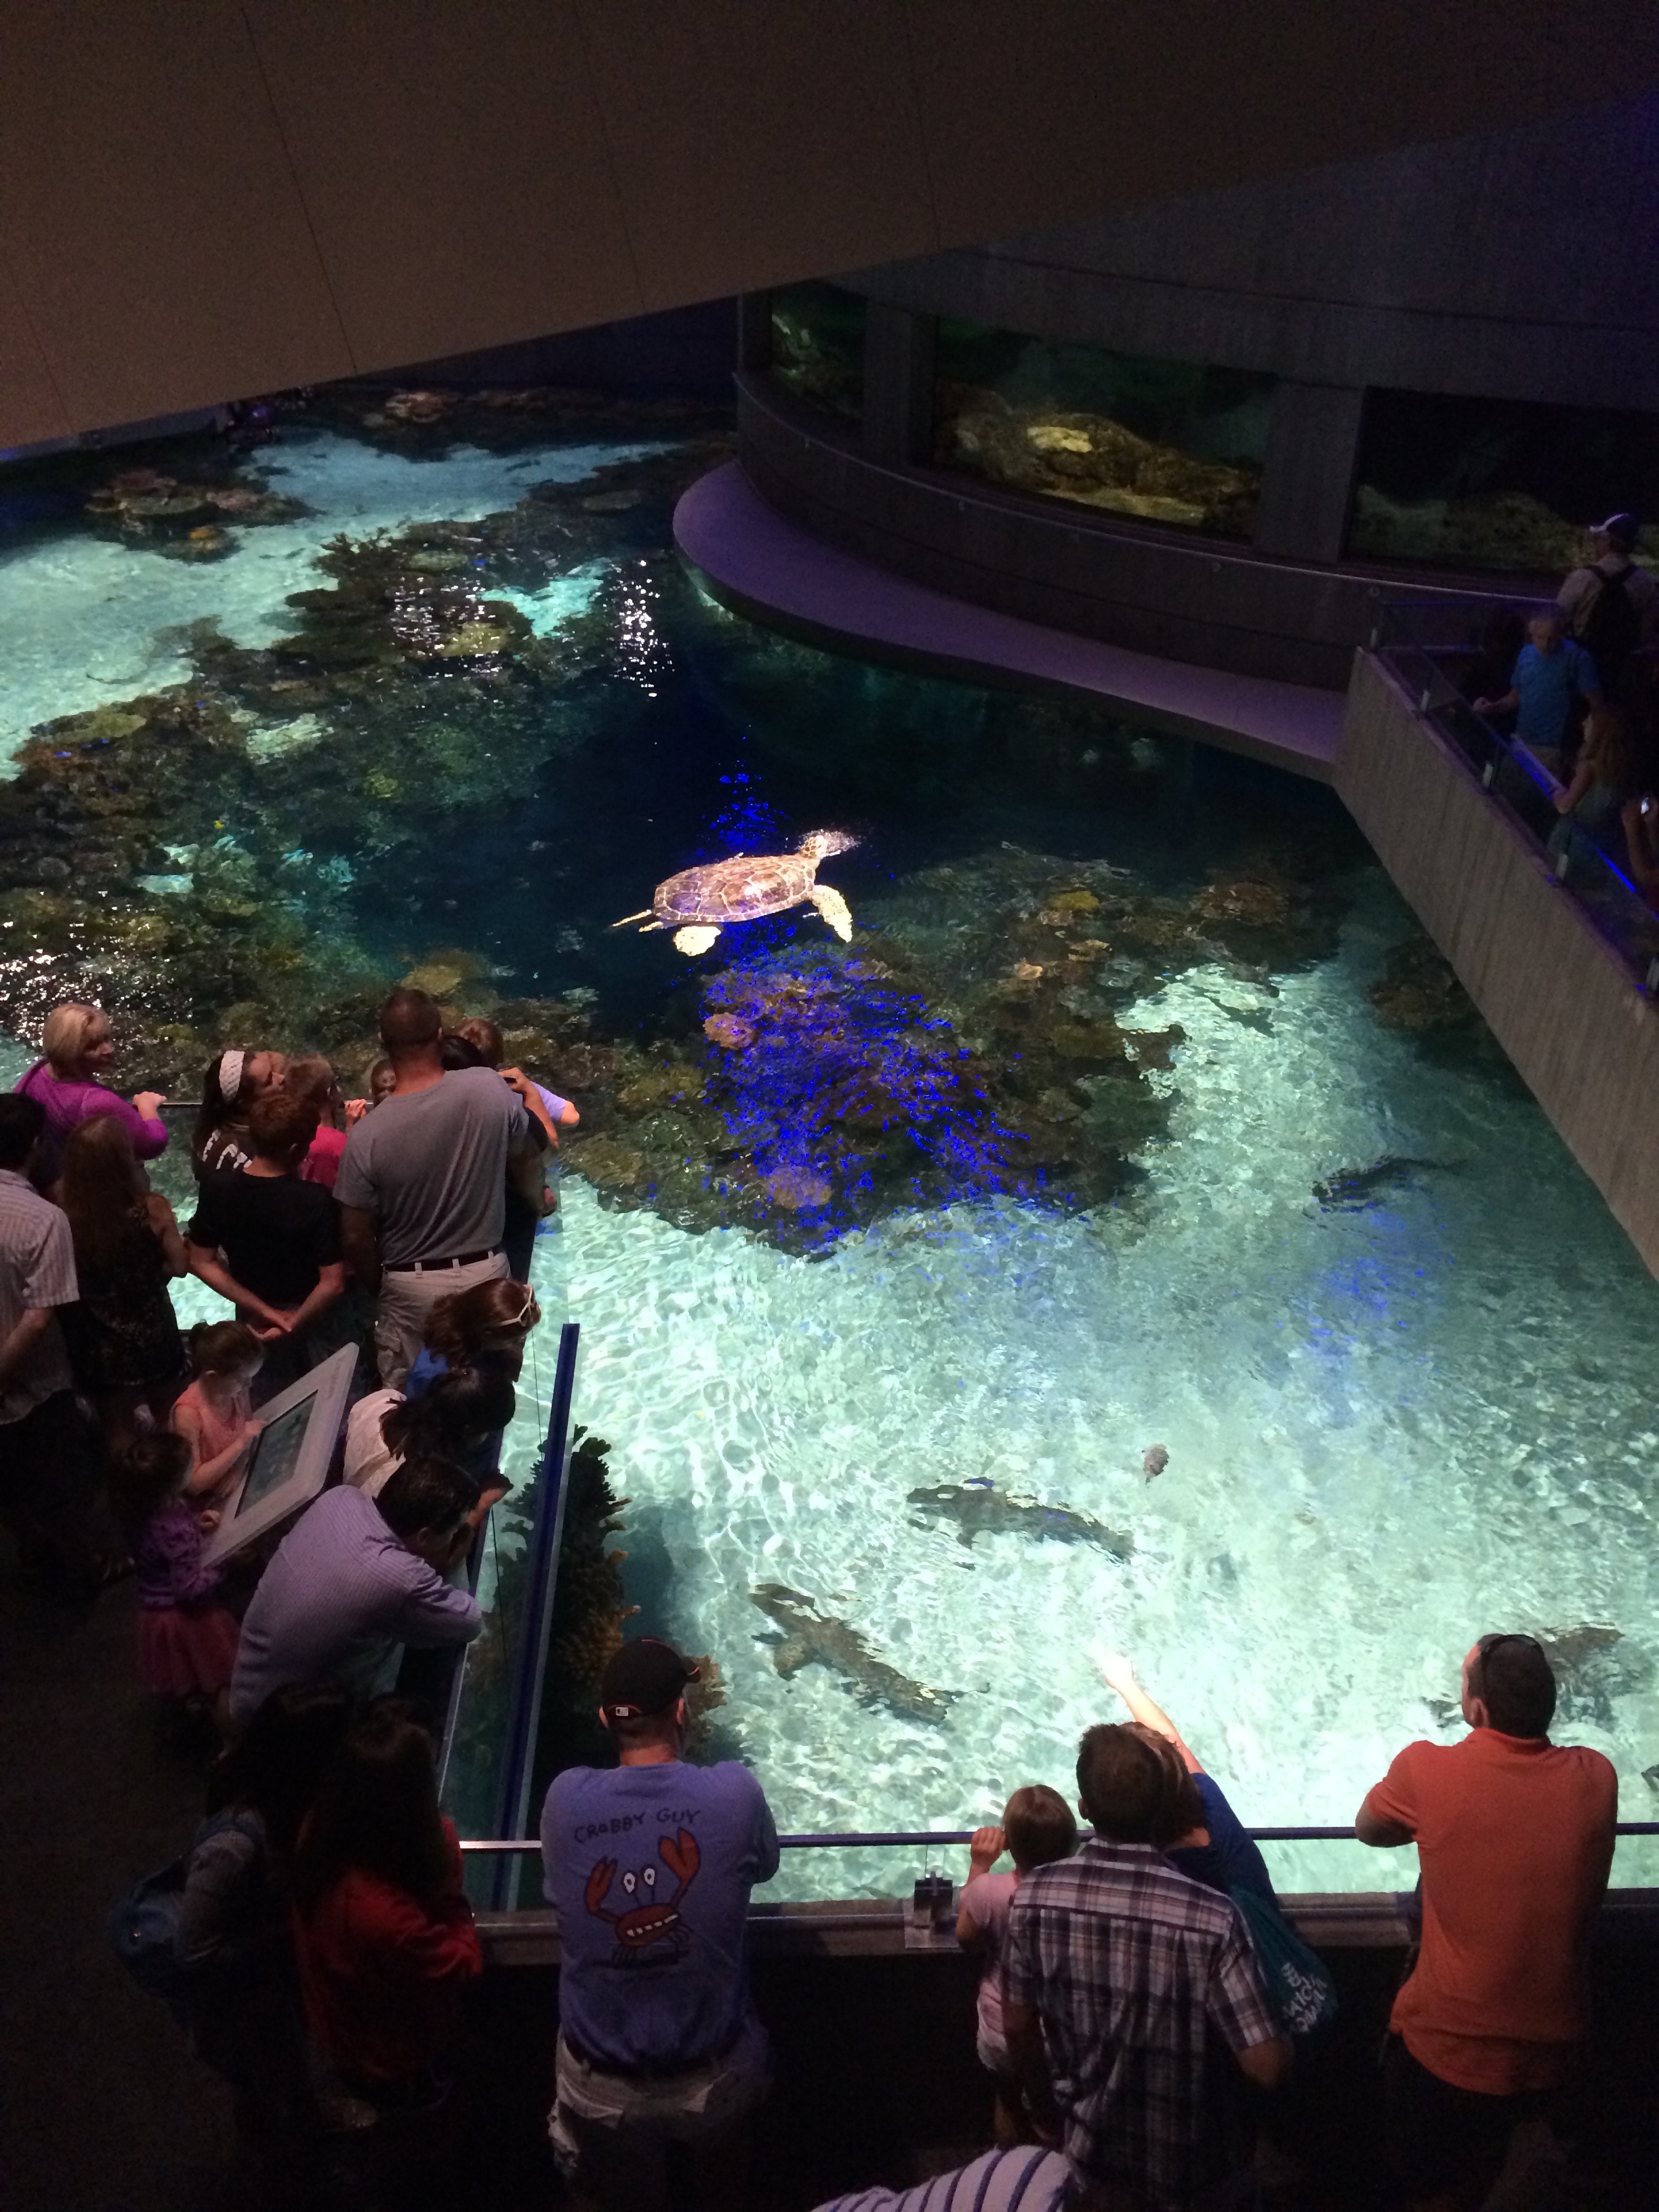 This was the main tank that the National Aquarium is designed around.